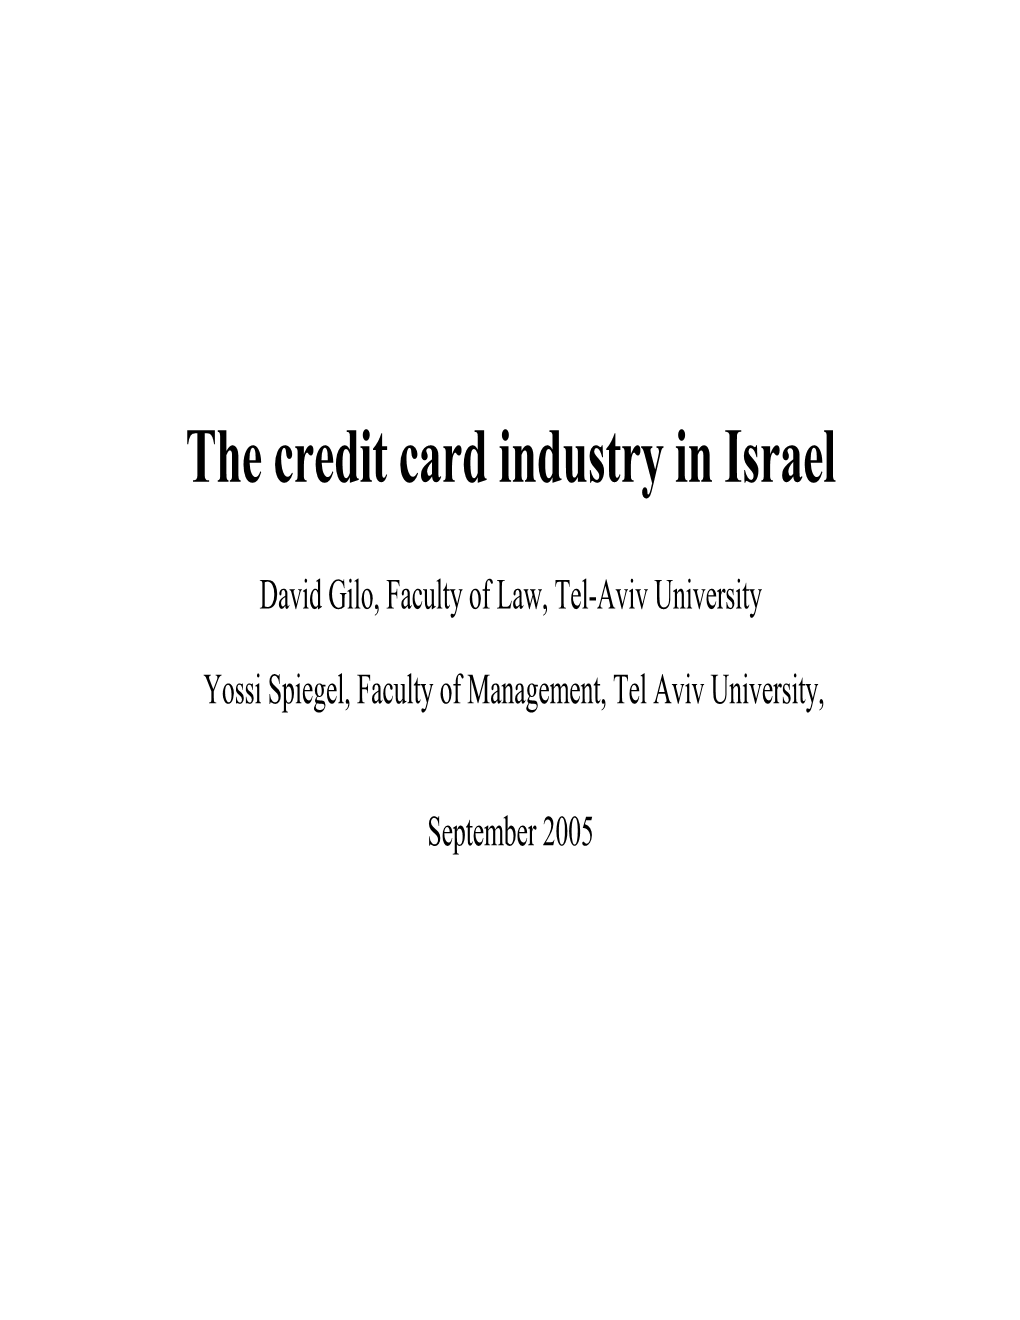 The Credit Card Industry in Israel